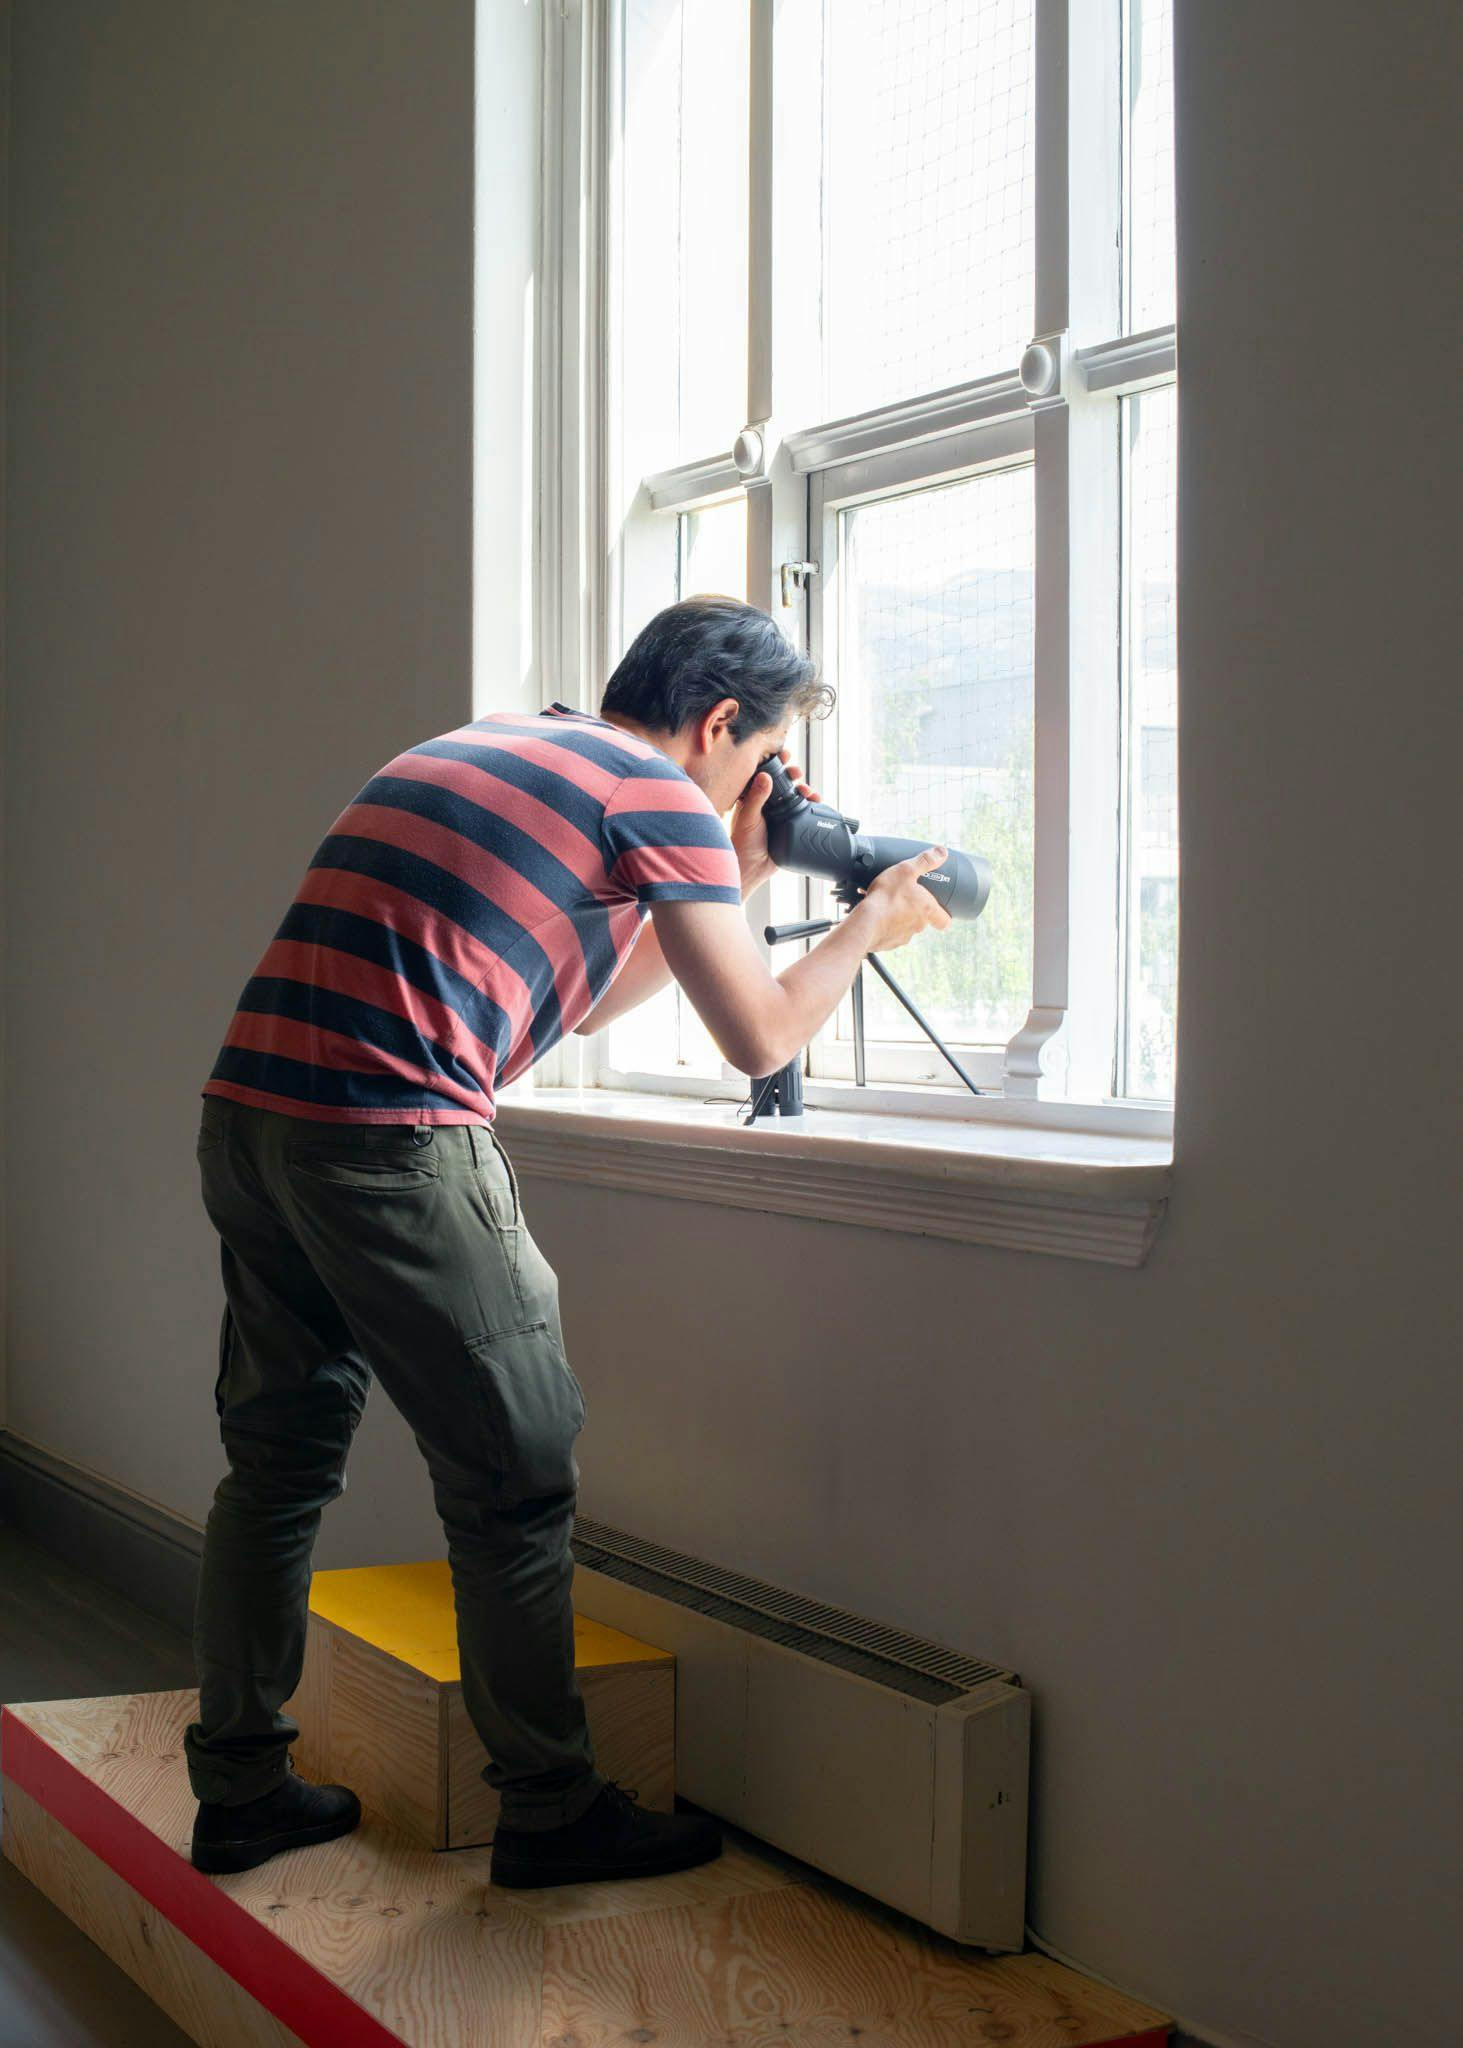 A man looks through a telescope out of a window